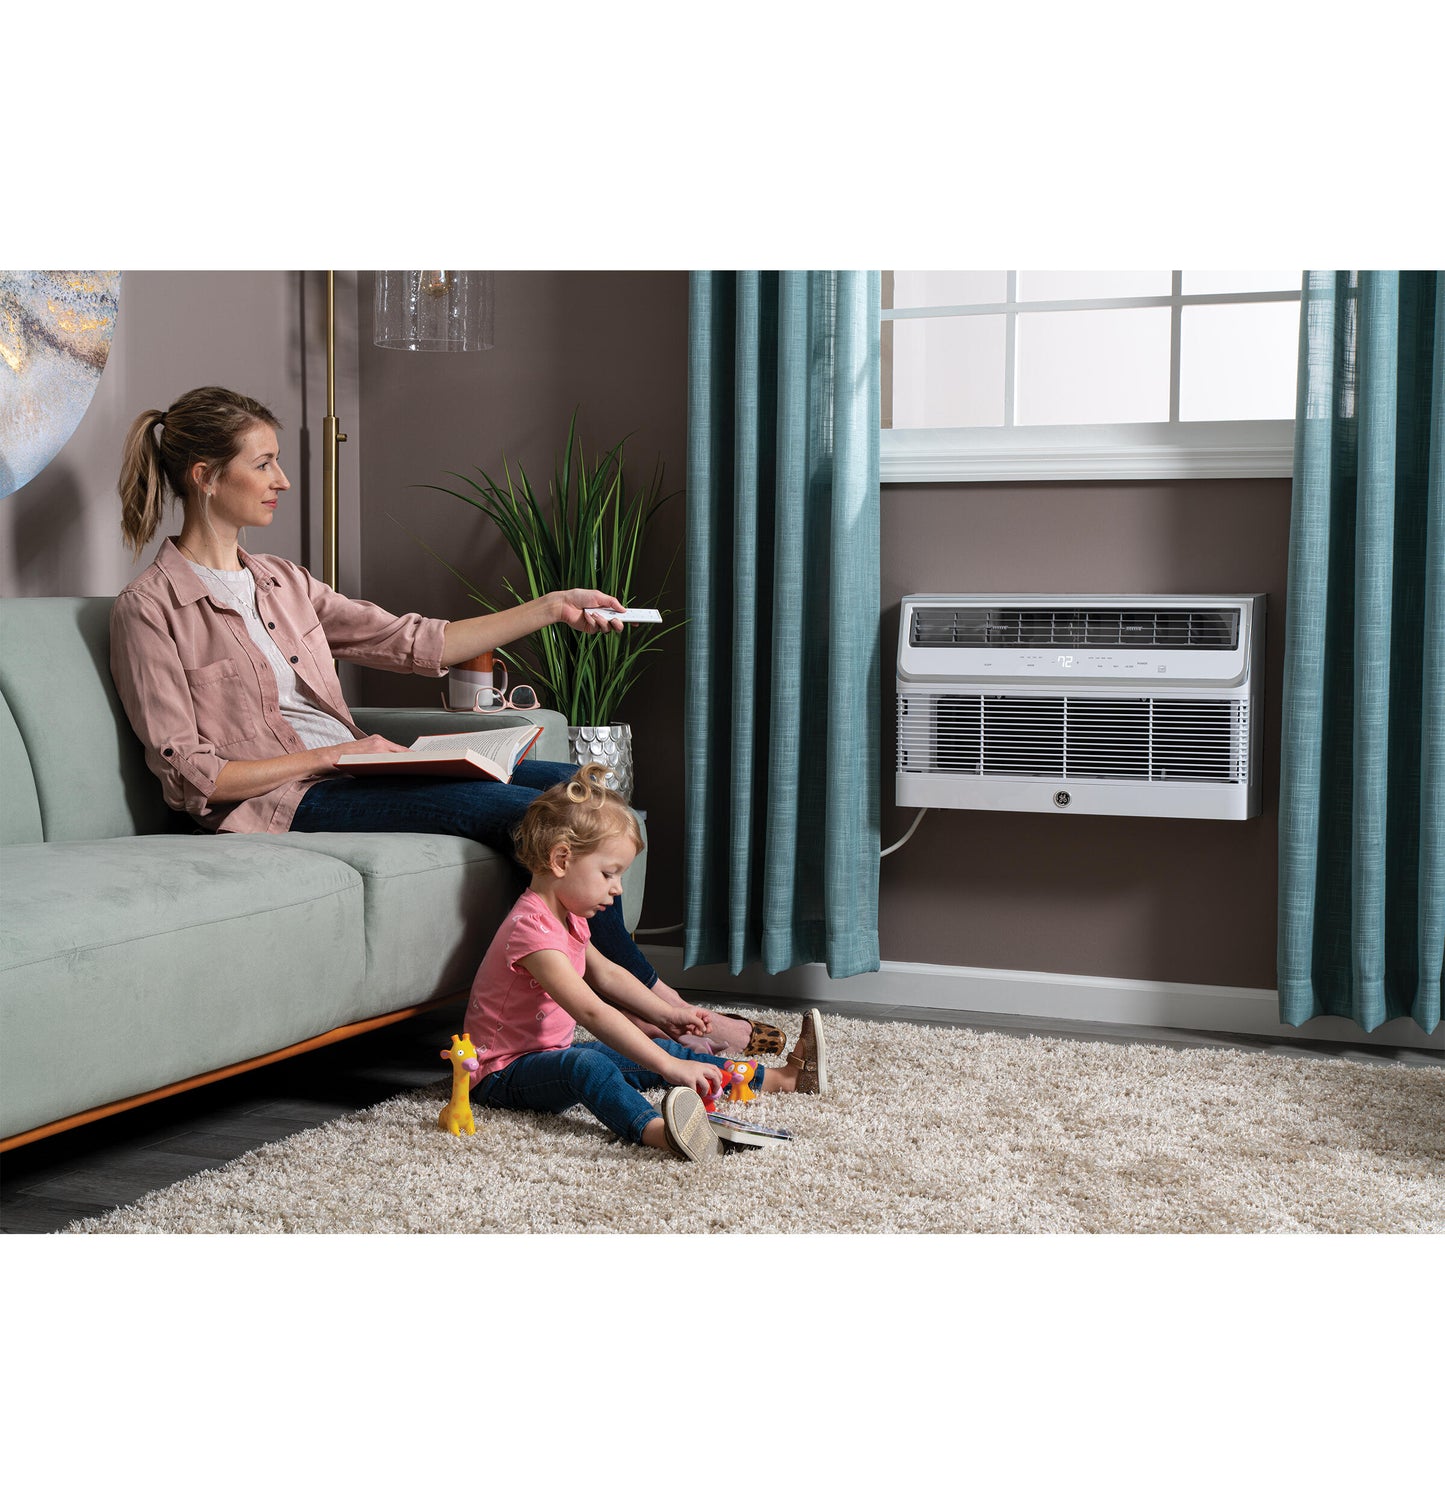 Ge Appliances AJCQ08AWH Ge® 115 Volt Built-In Cool-Only Room Air Conditioner